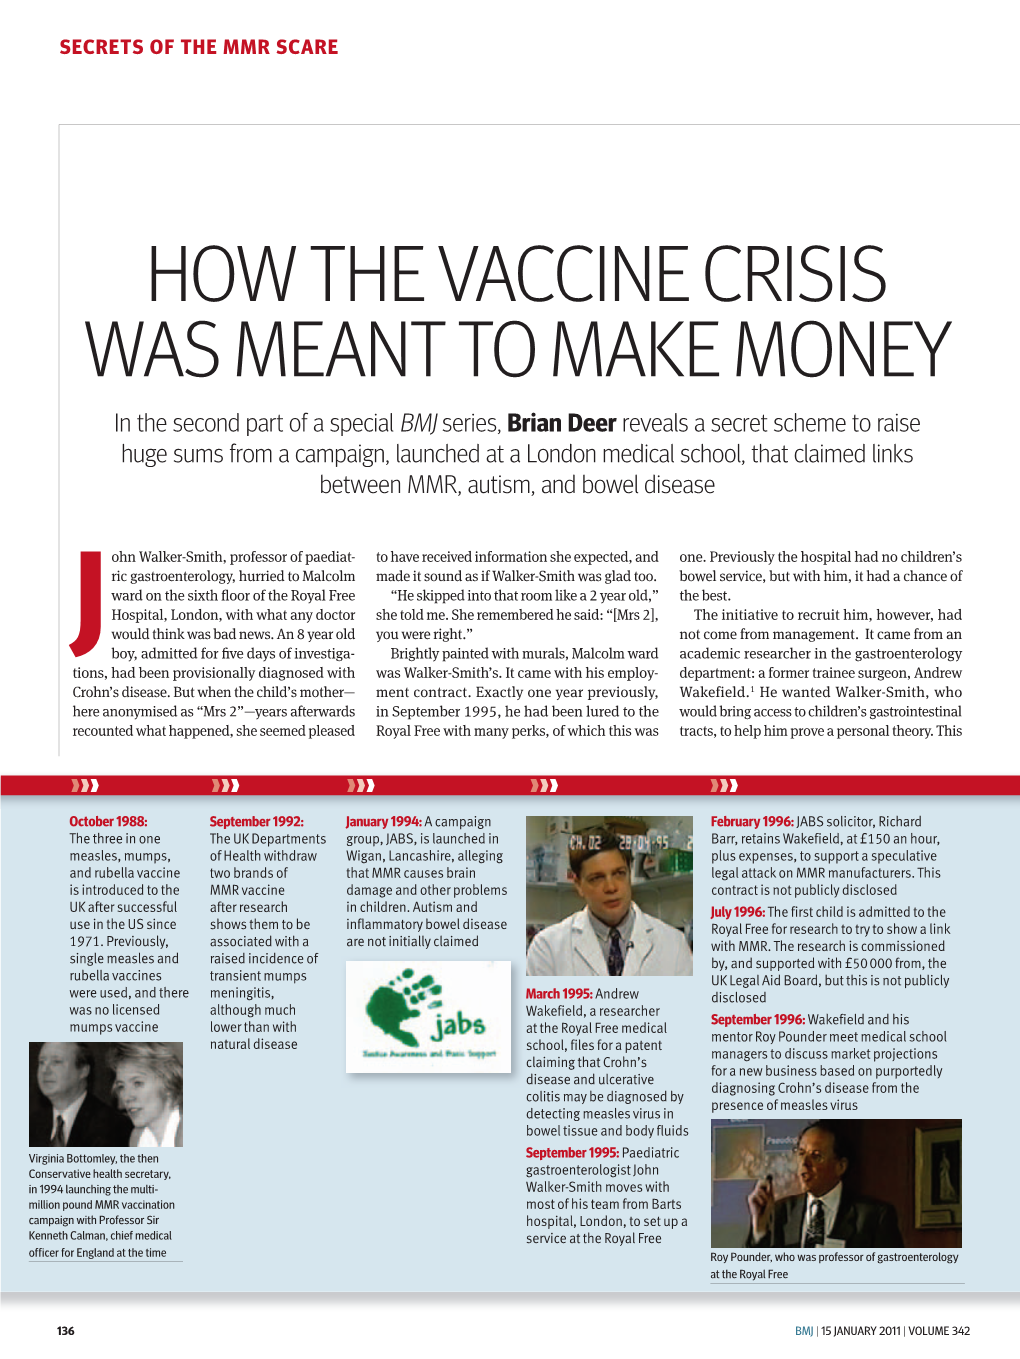 How the Vaccine Crisis Was Meant to Make Money